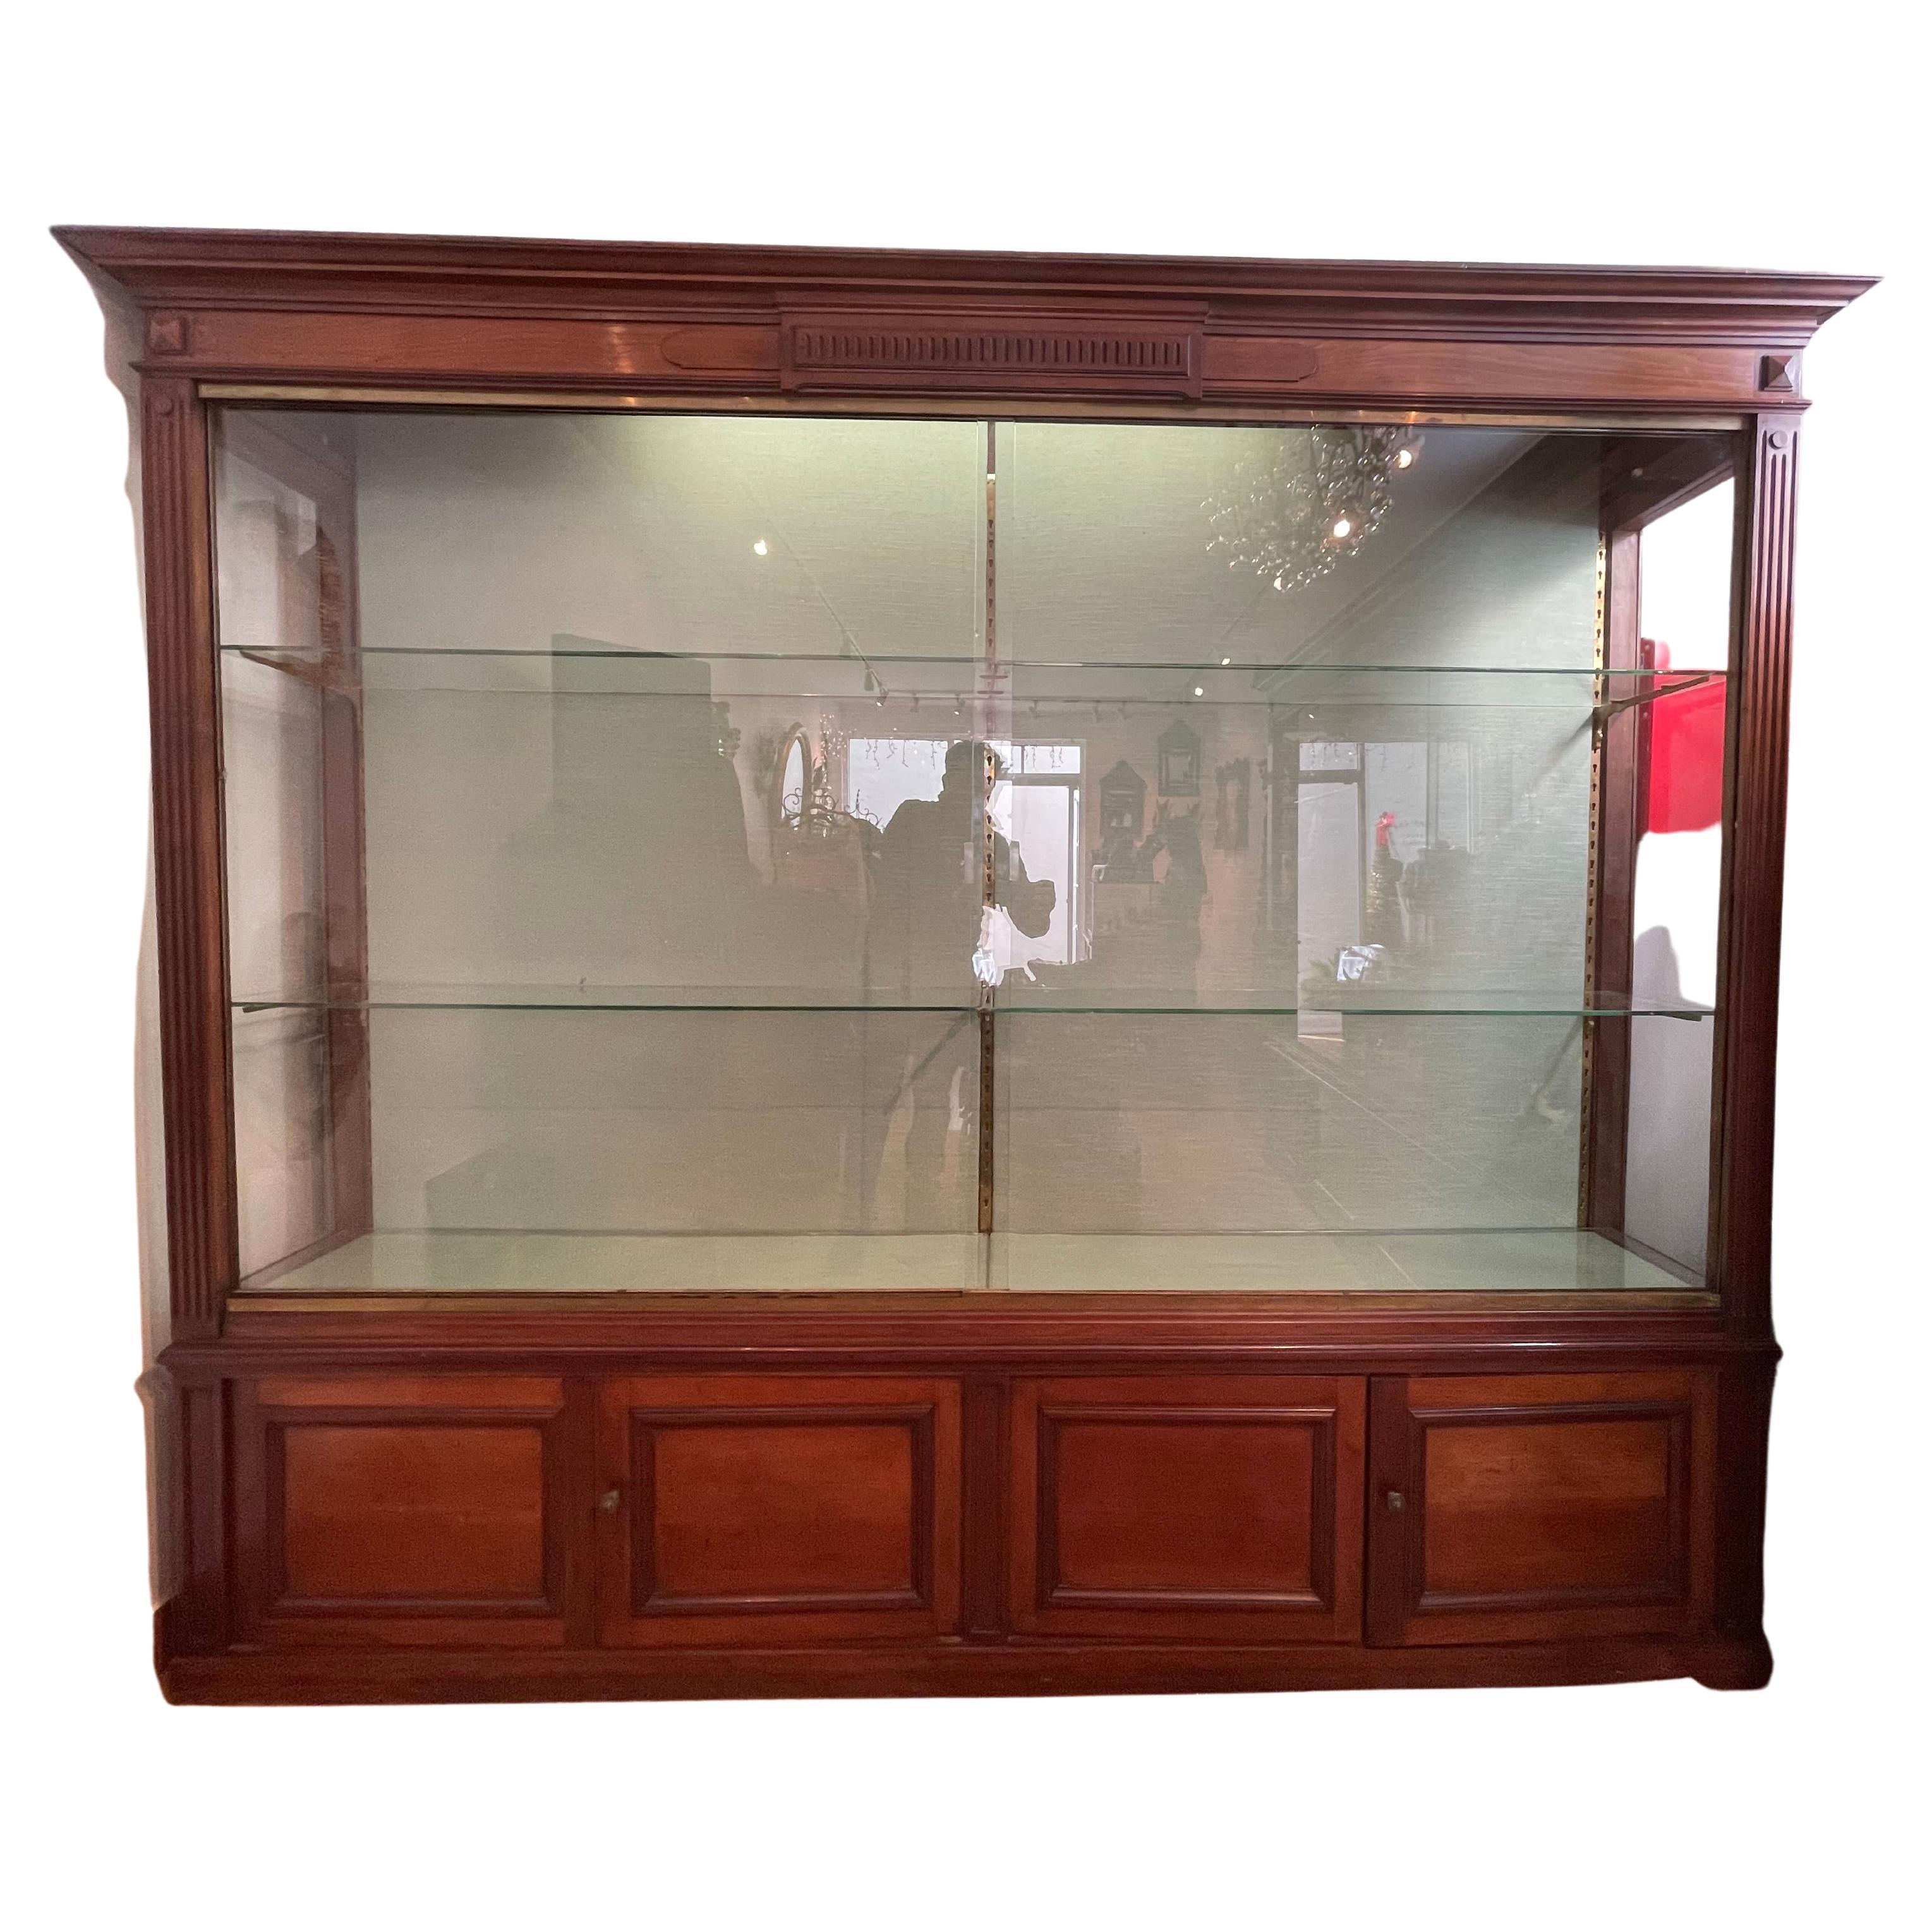 pk Succes Medisch wangedrag Napoleon III French Store Vitrine Display Showcase For Sale at 1stDibs